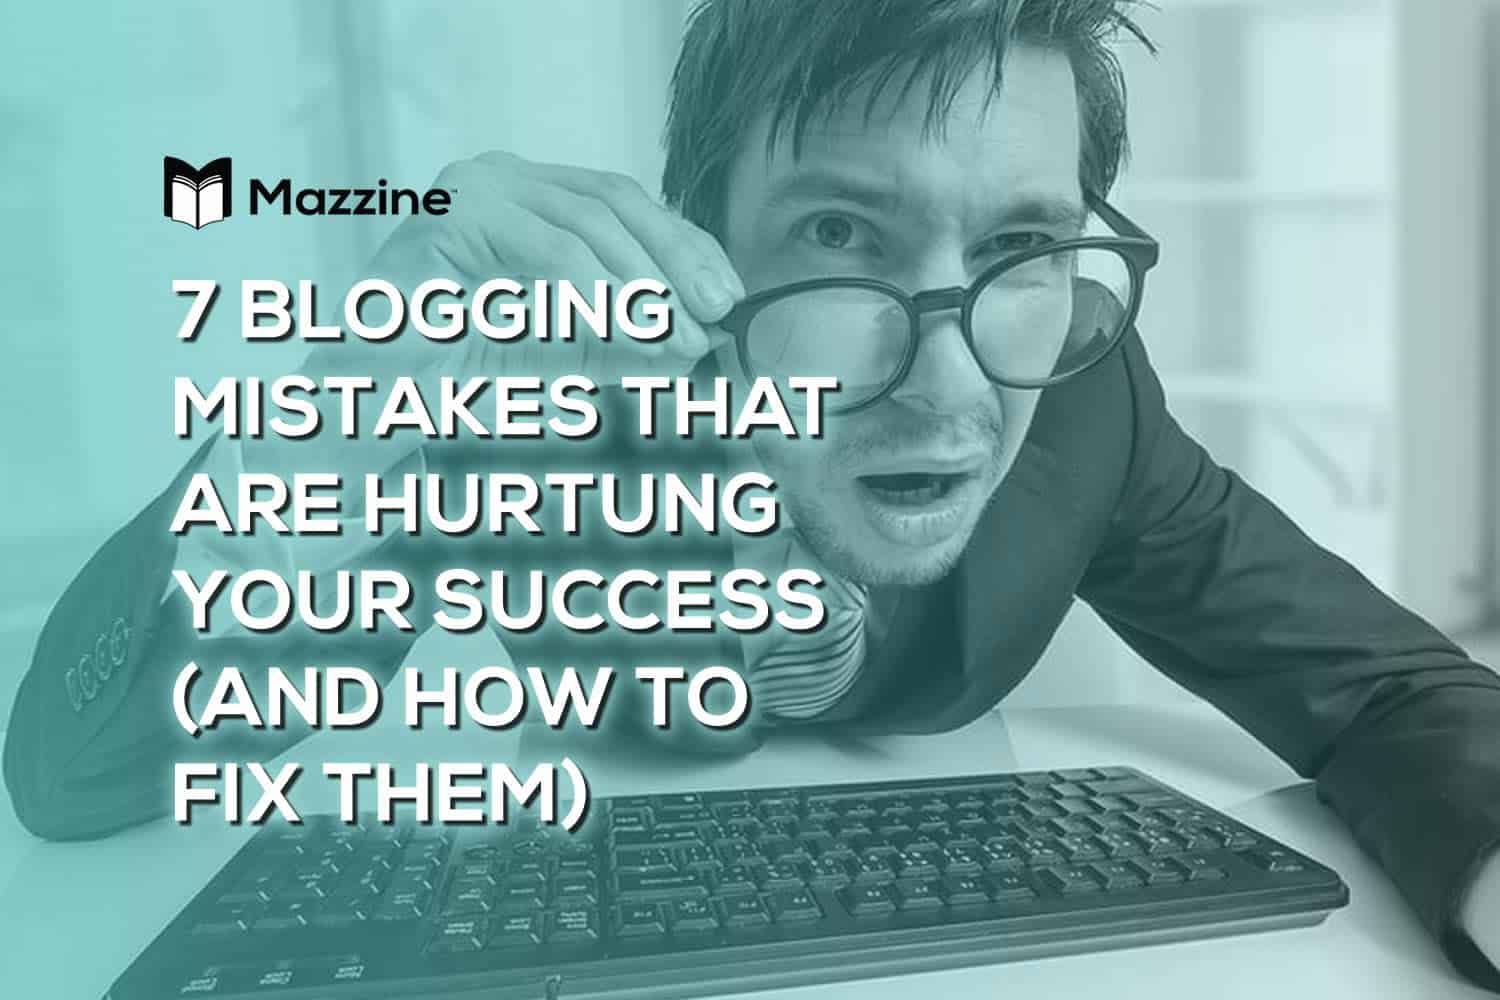 7 Blogging Mistakes That Are Hurting Your Success (And How to Fix Them)